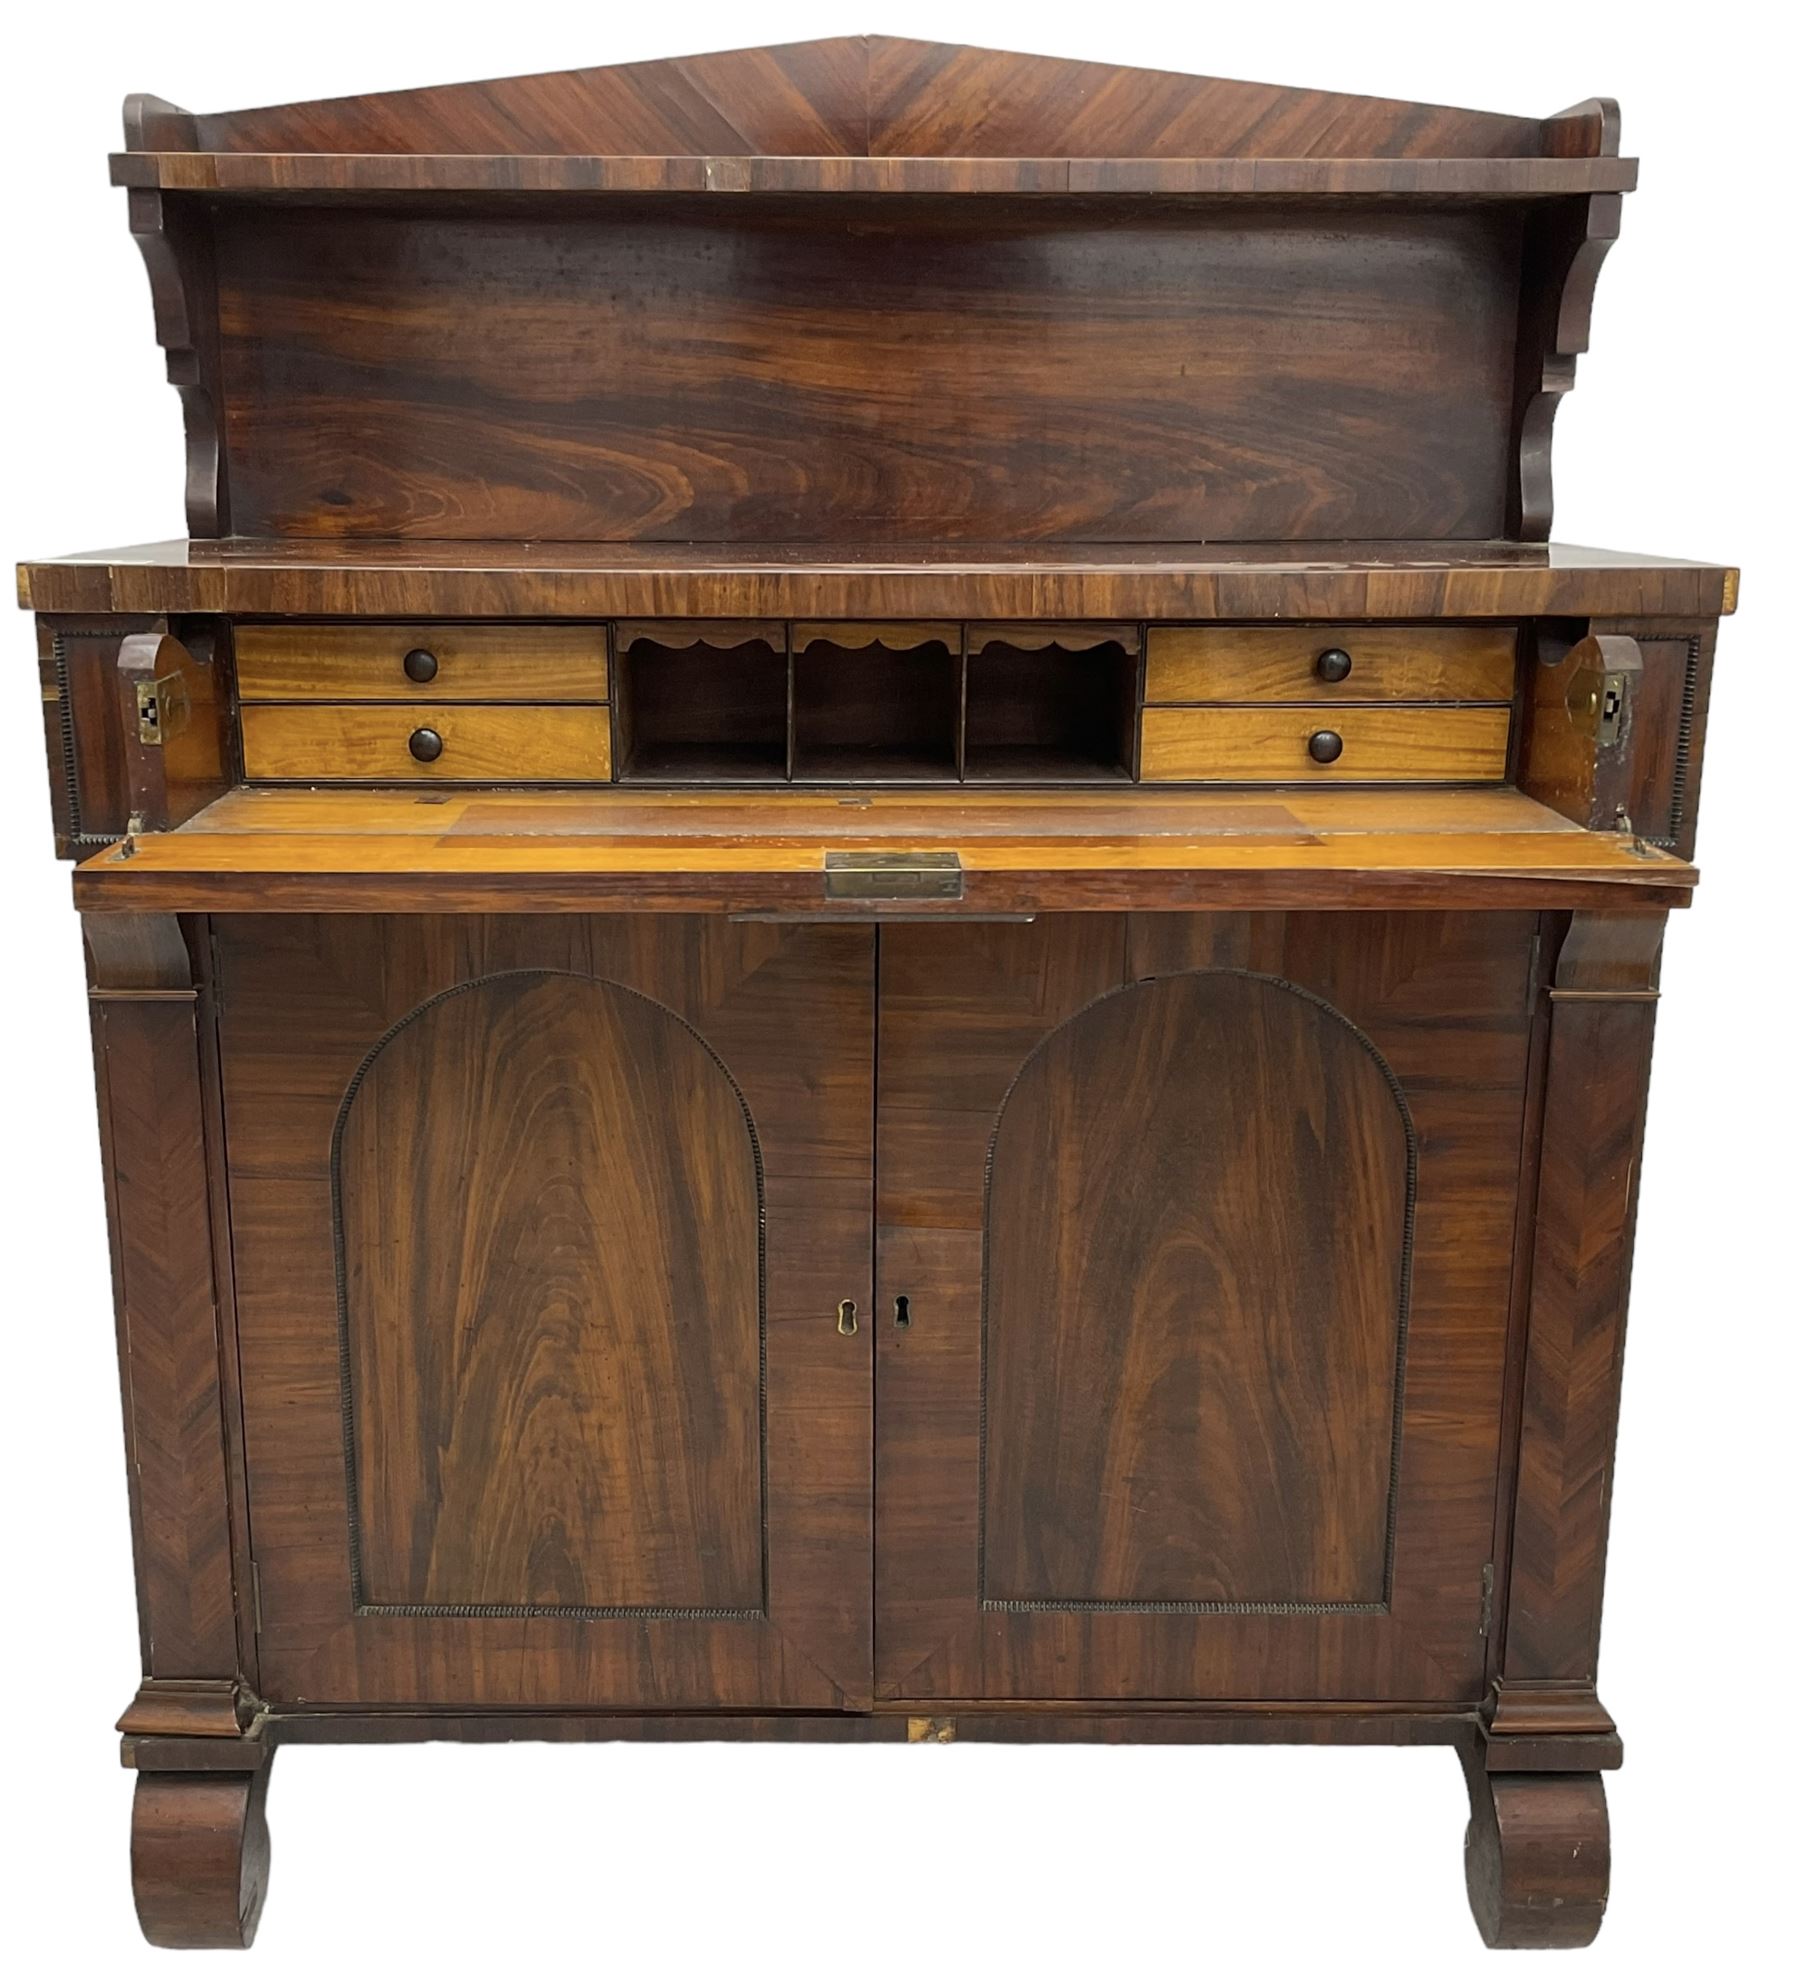 Early 19th century rosewood chiffonier - Image 4 of 7